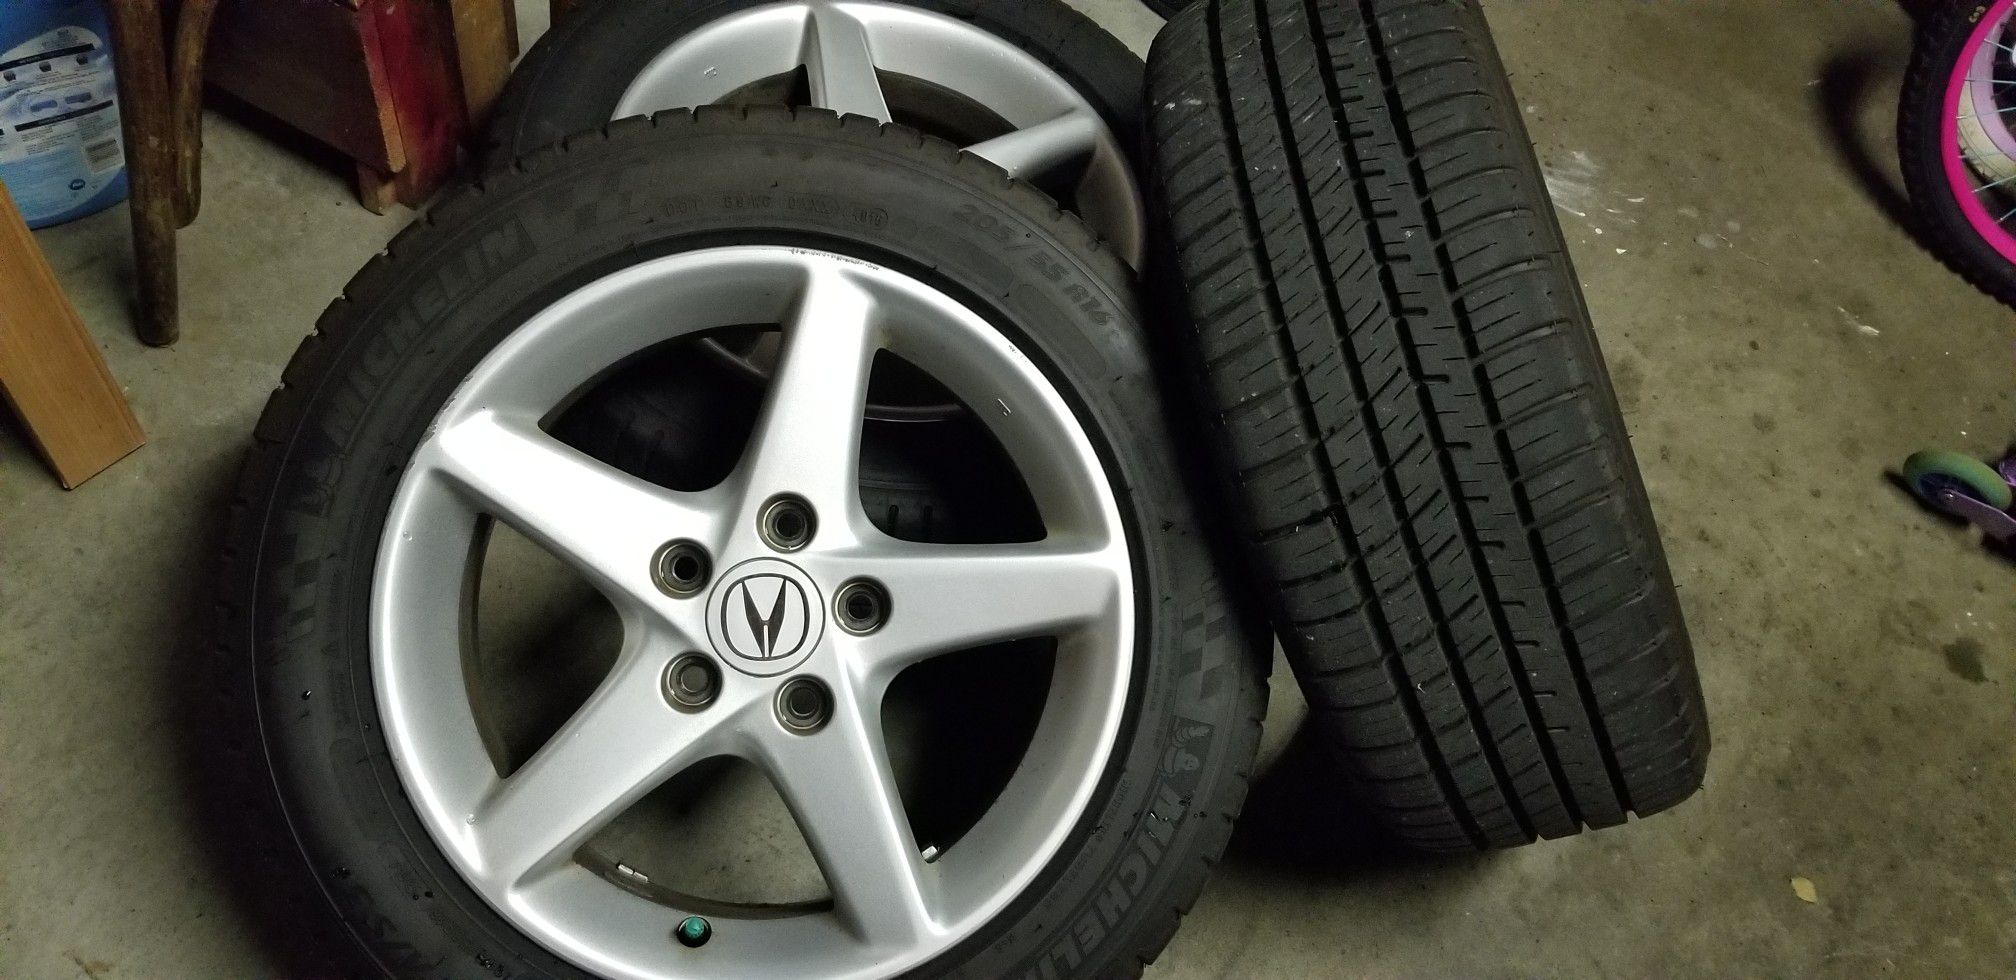 Acura rsx oem rims with almost bnew Michelin tires